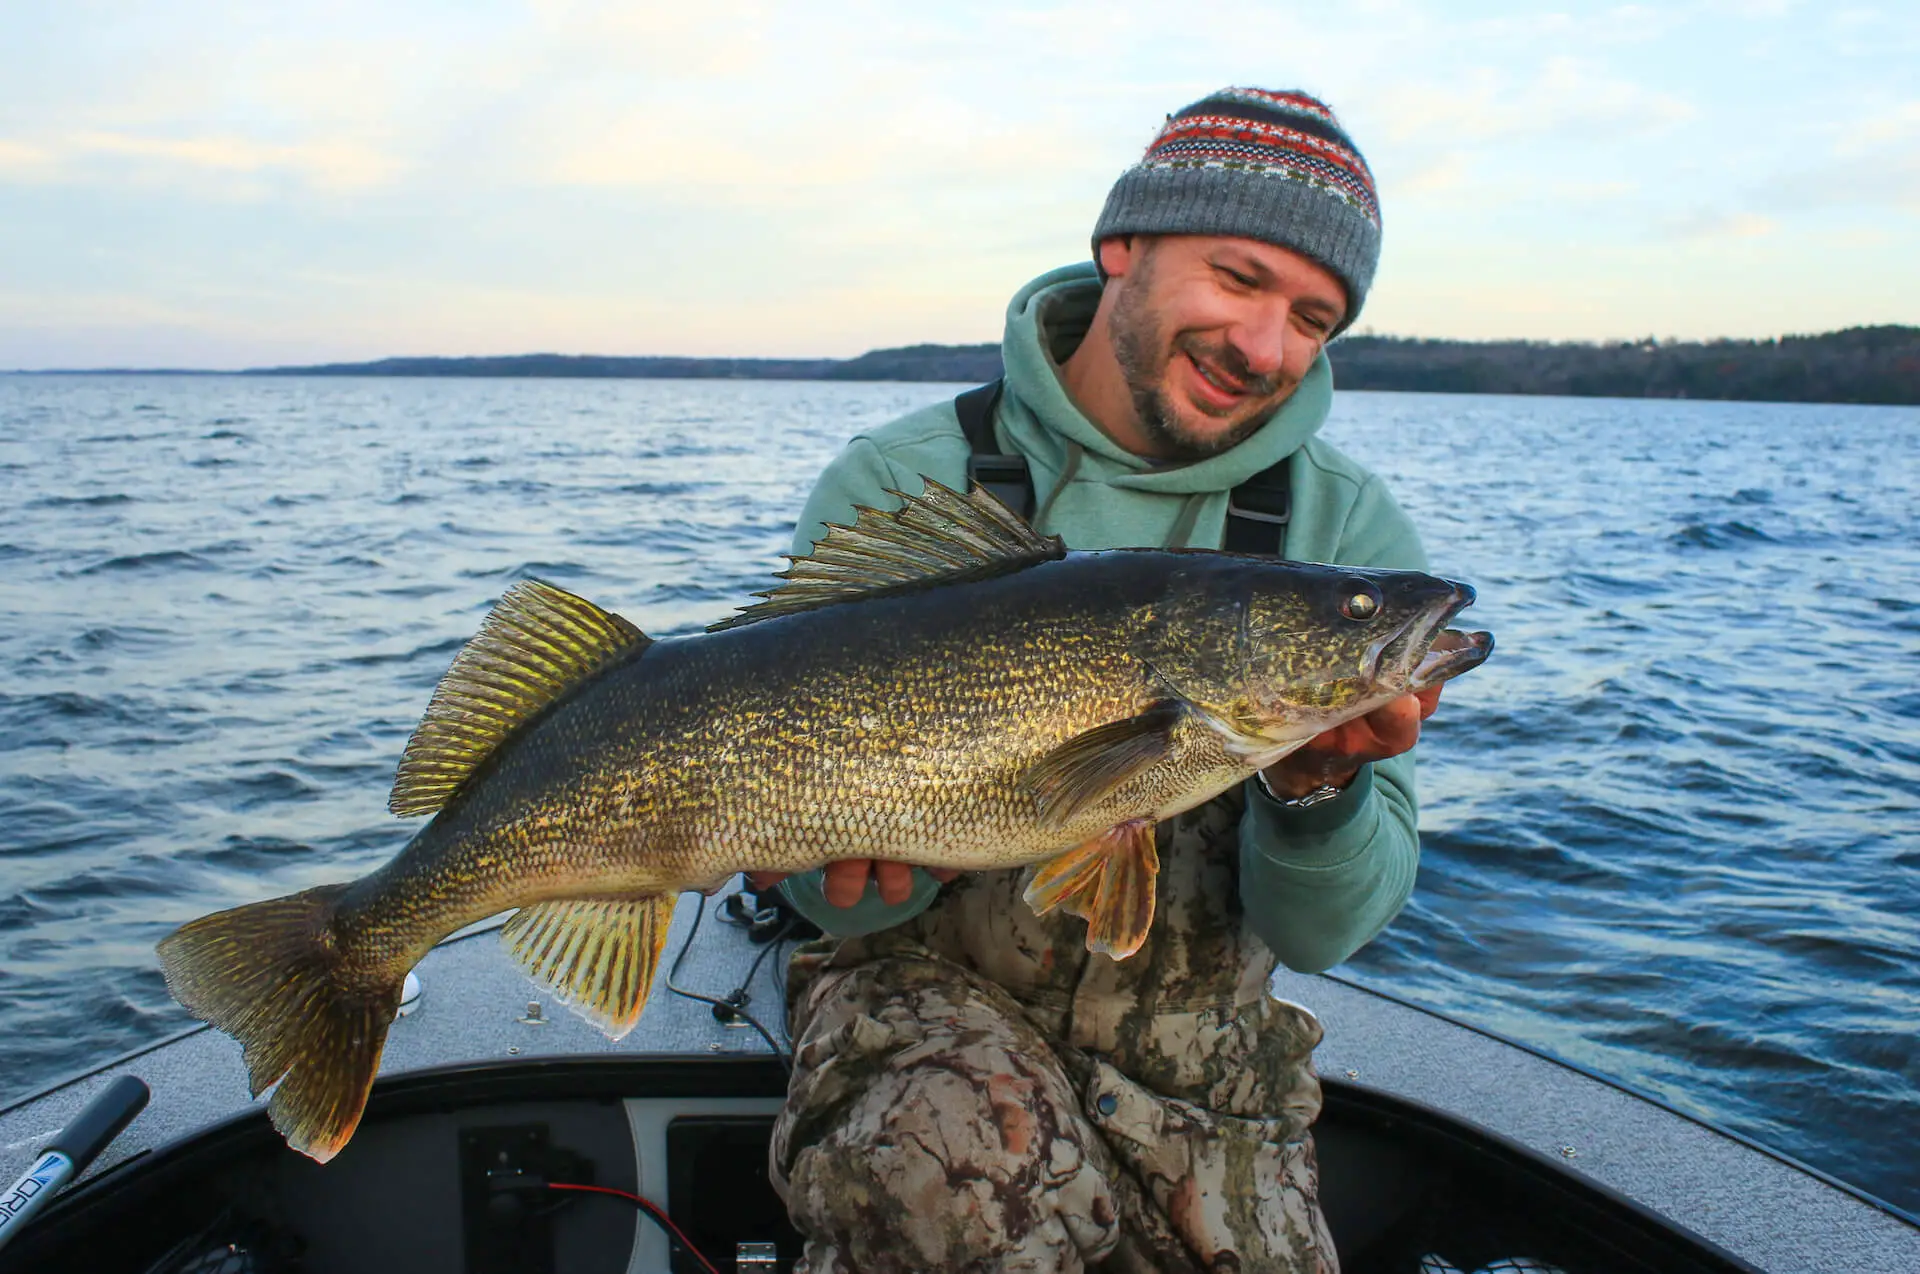 Best walleye rod review: A big walleye caught while jigging